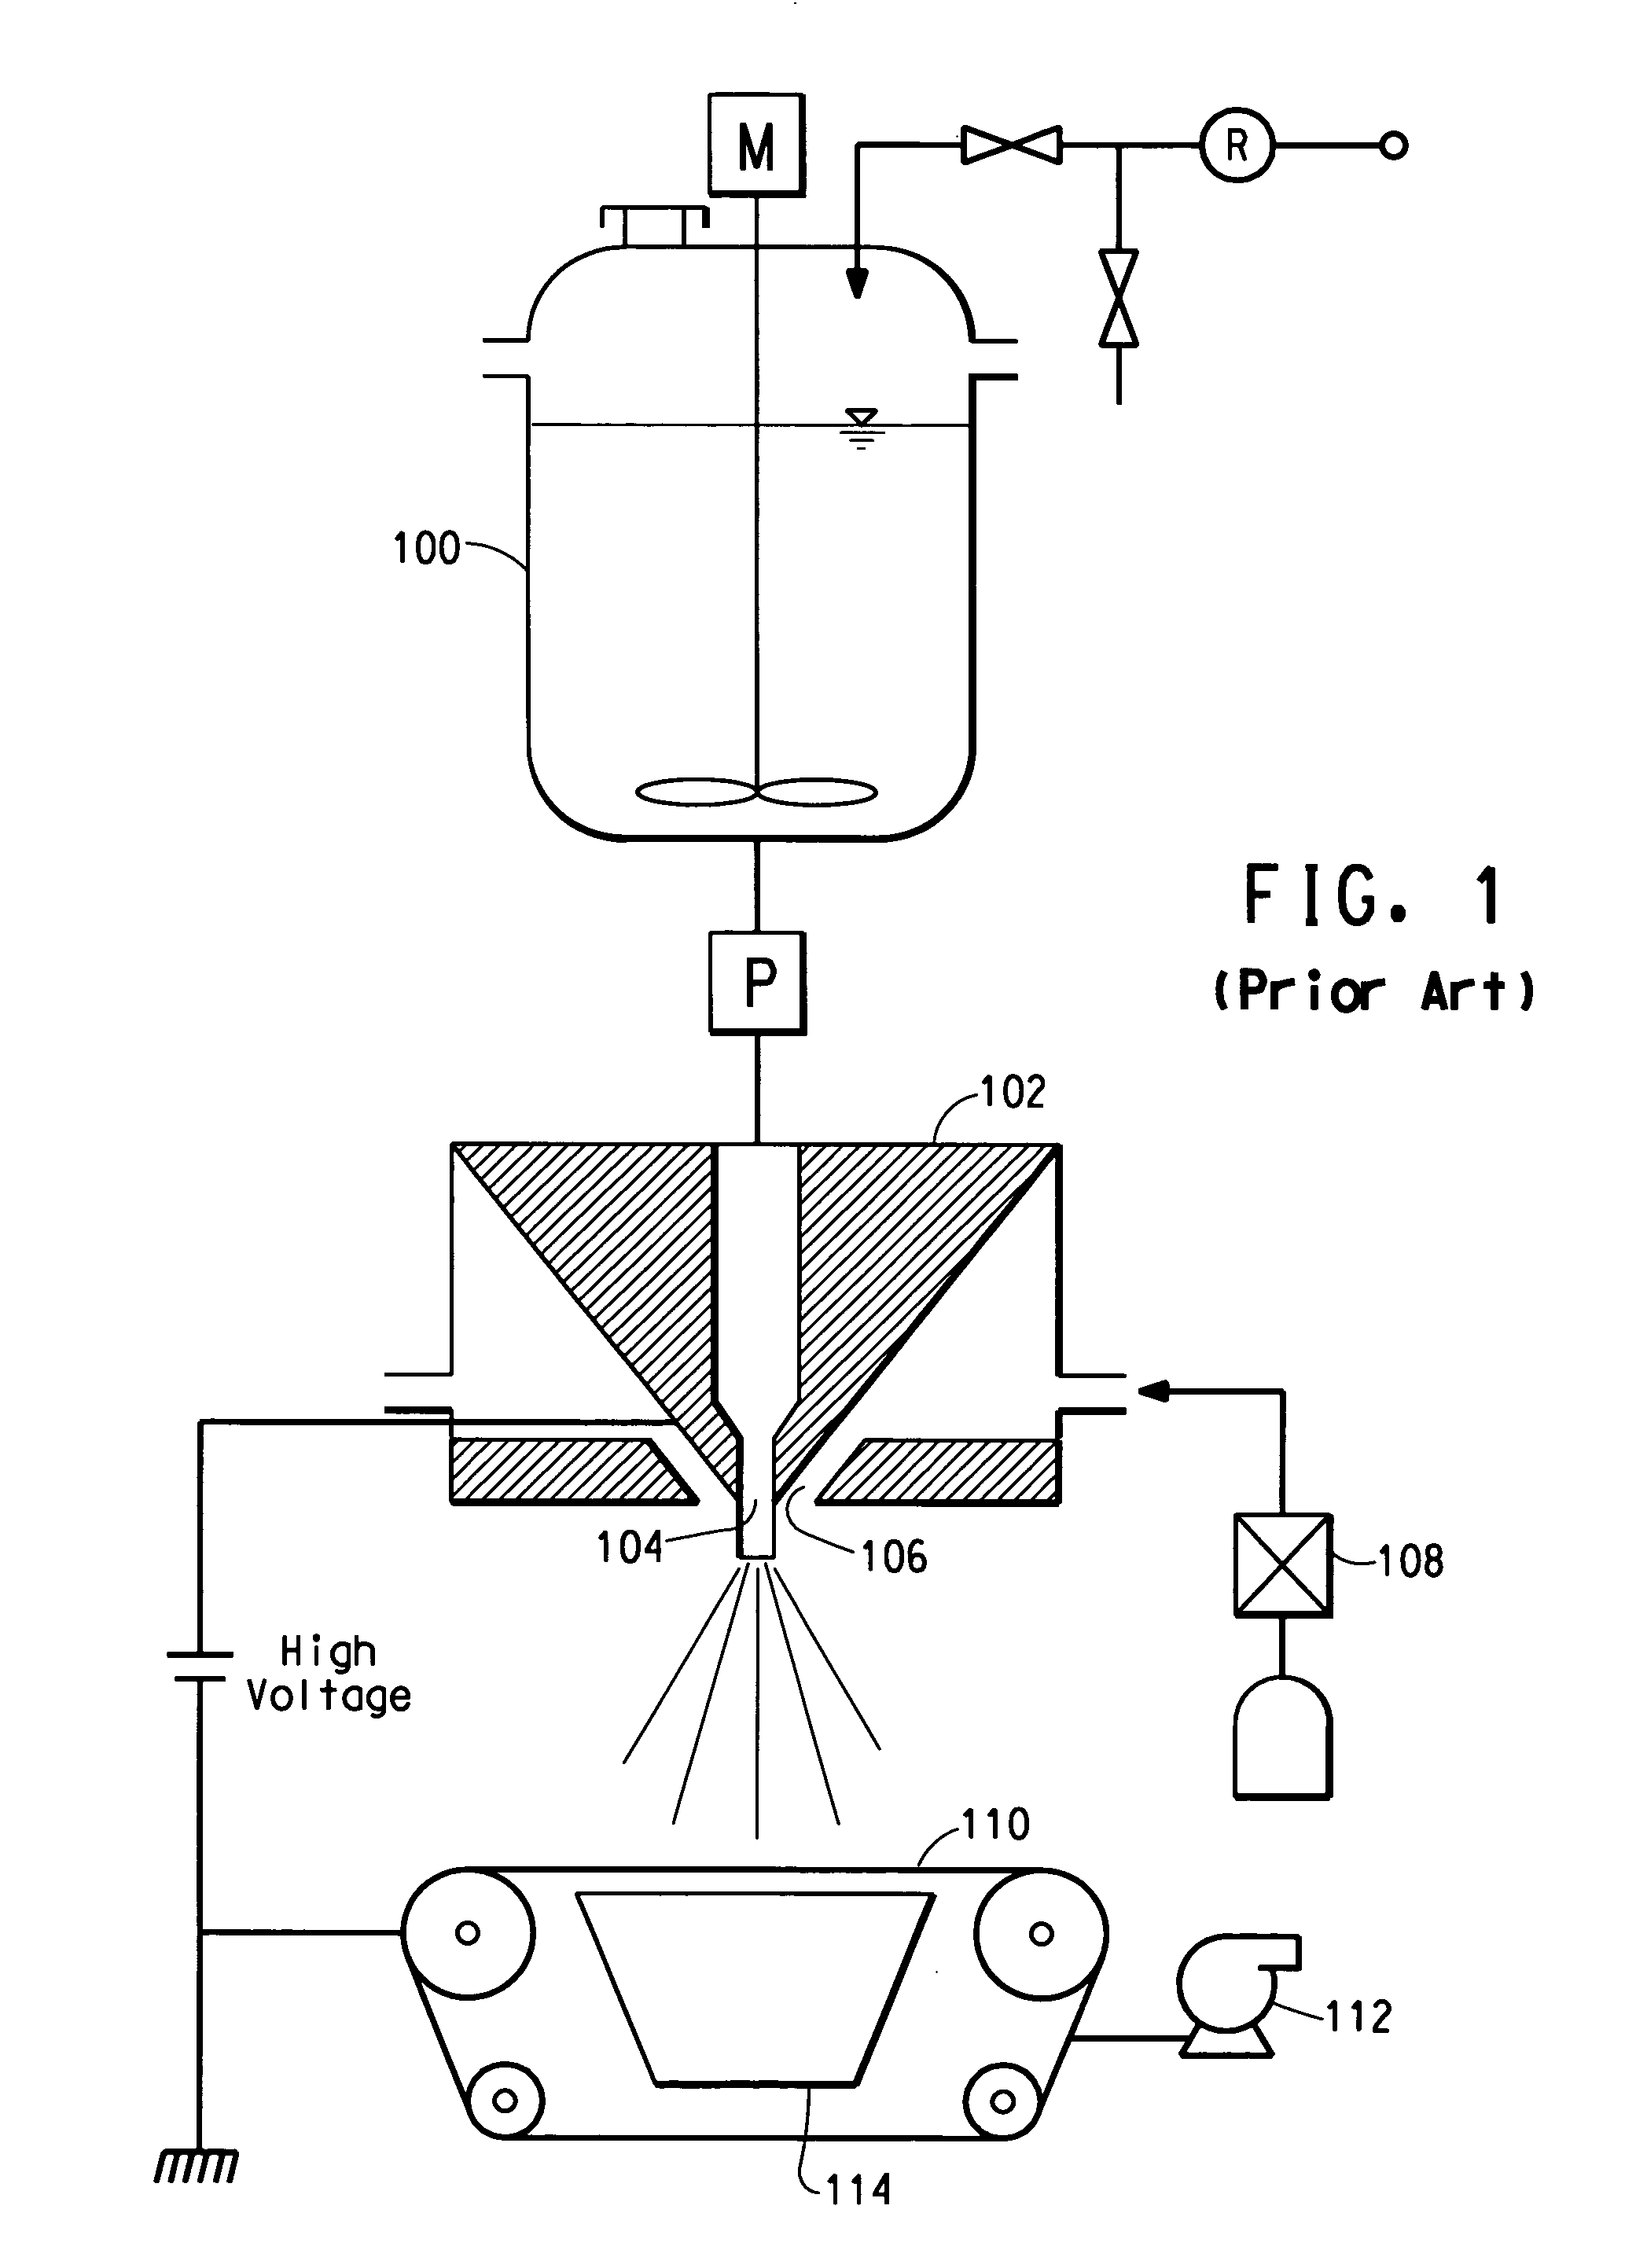 Filtration media for filtering particulate material from gas streams